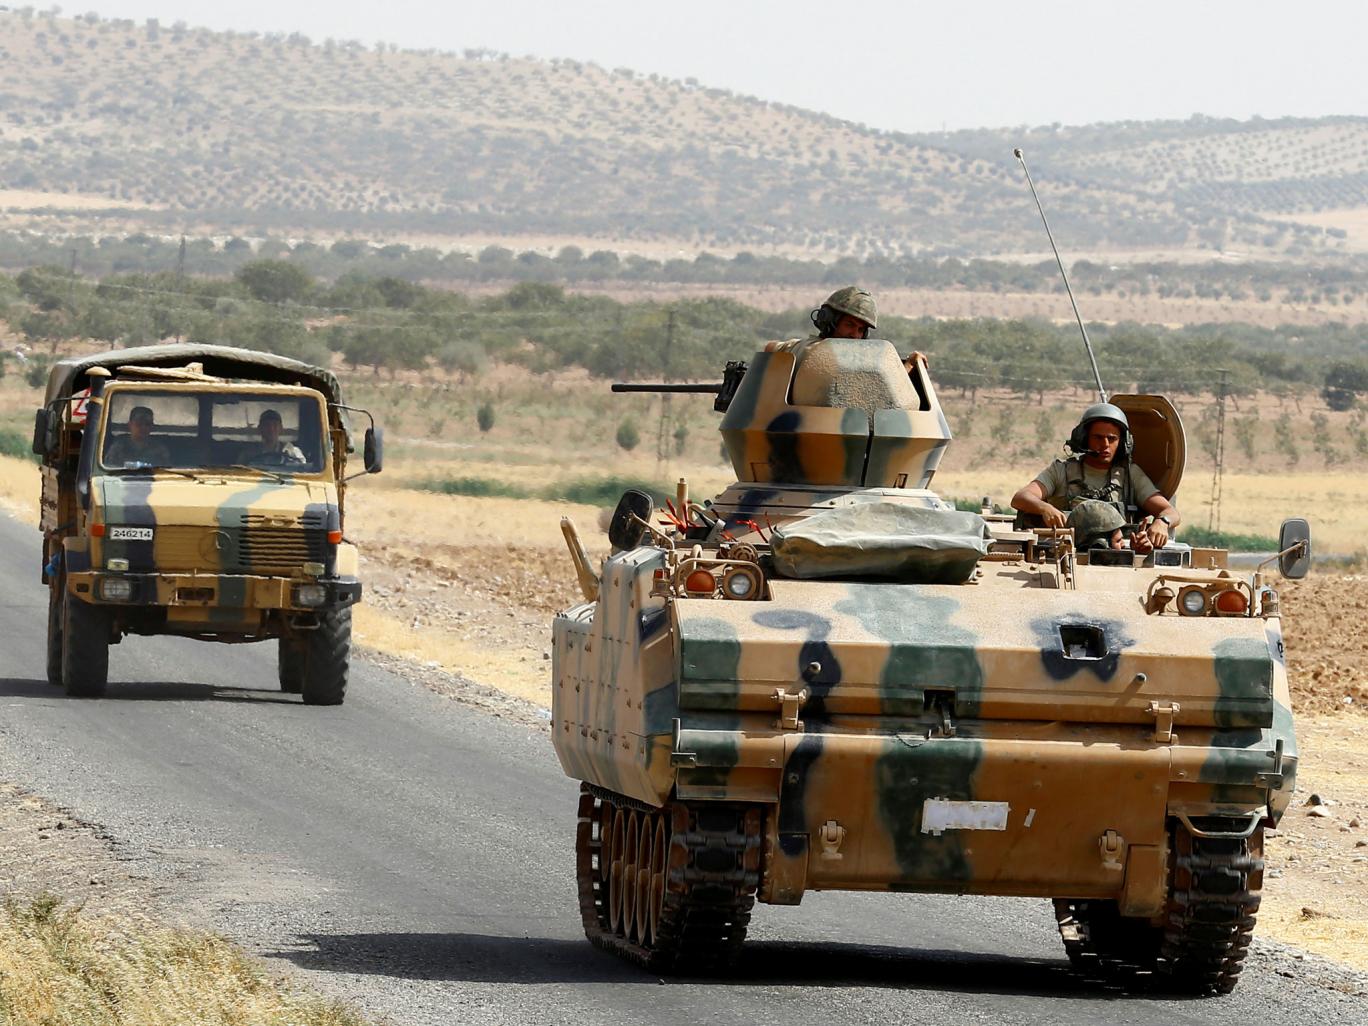 Turkish army thrusts deeper into Syria, monitor says 35 villagers killed